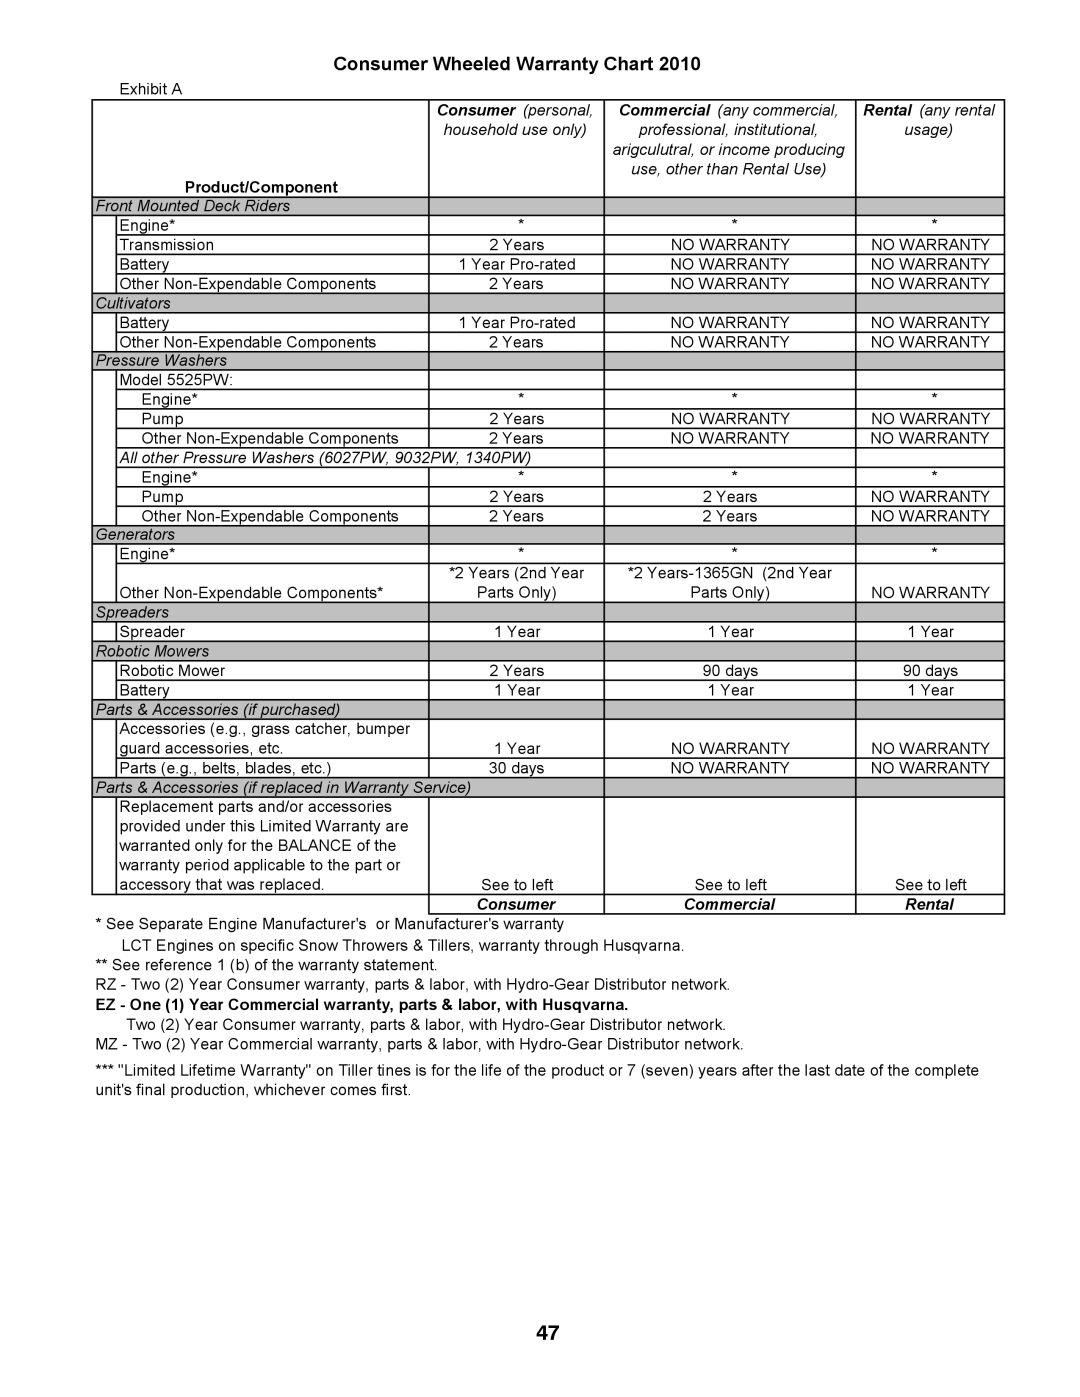 Husqvarna 532 44 05-66, 96045003000 owner manual Consumer Wheeled Warranty Chart, Product/Component, Rental 